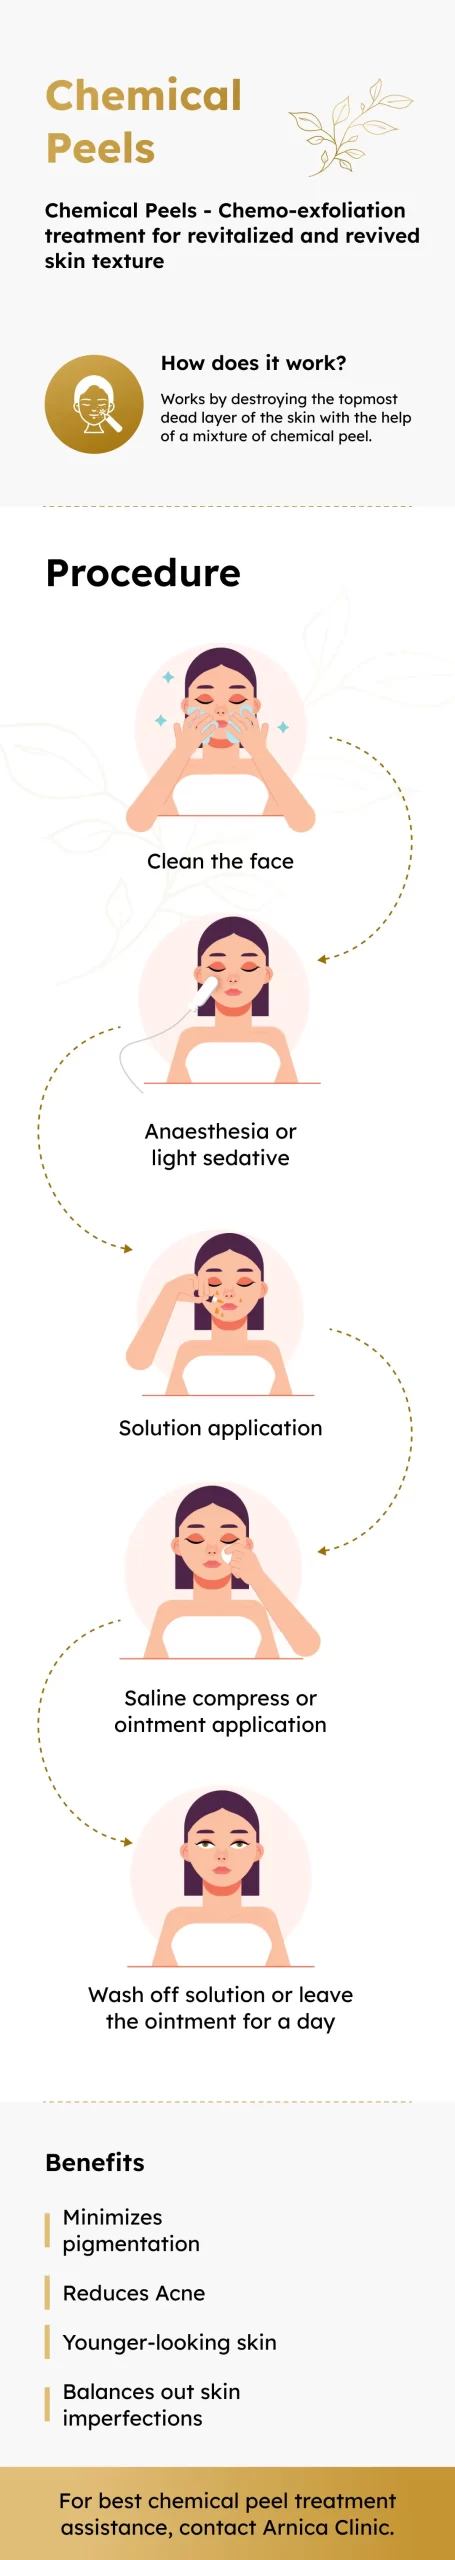 Infographic for Chemical Peel Treatment in Pune